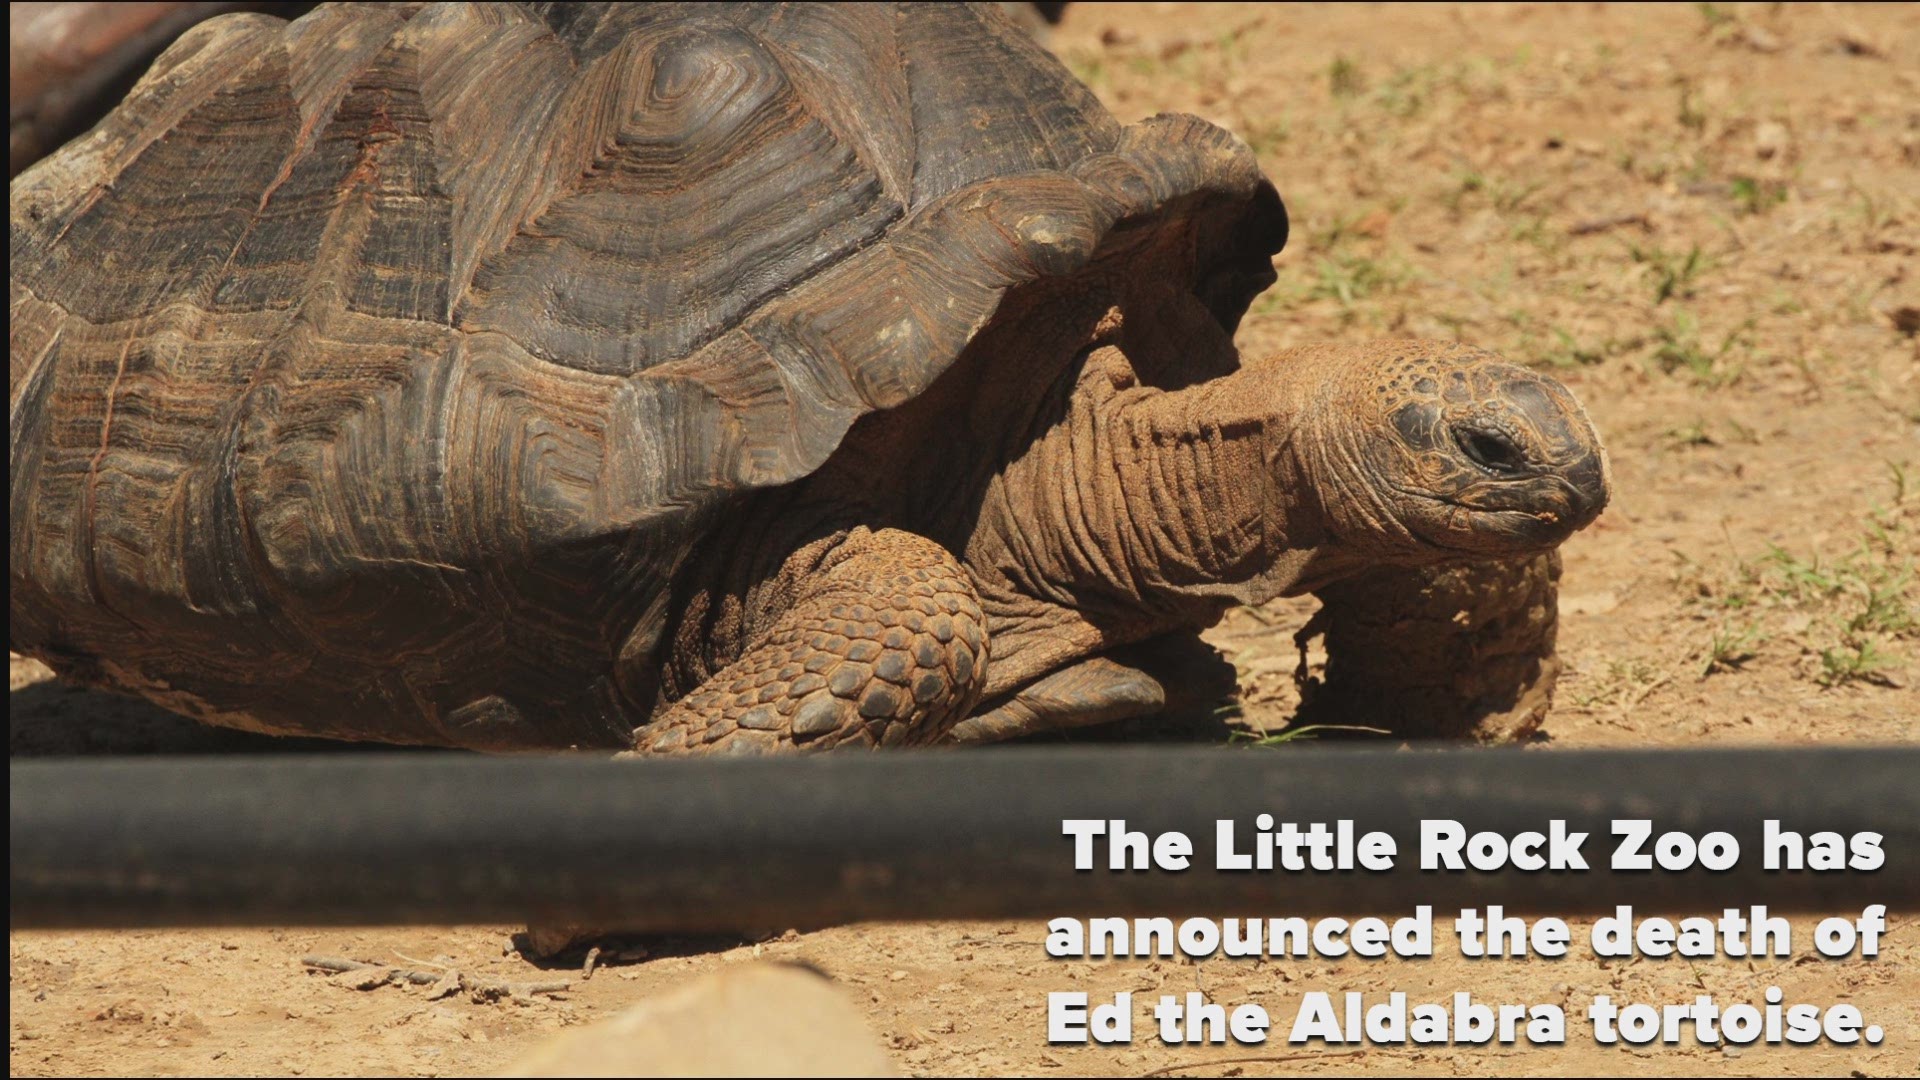 Ed the Aldabra tortoise was known for his larger size of 580 pounds. He was with the Little Rock Zoo family for 28 years.